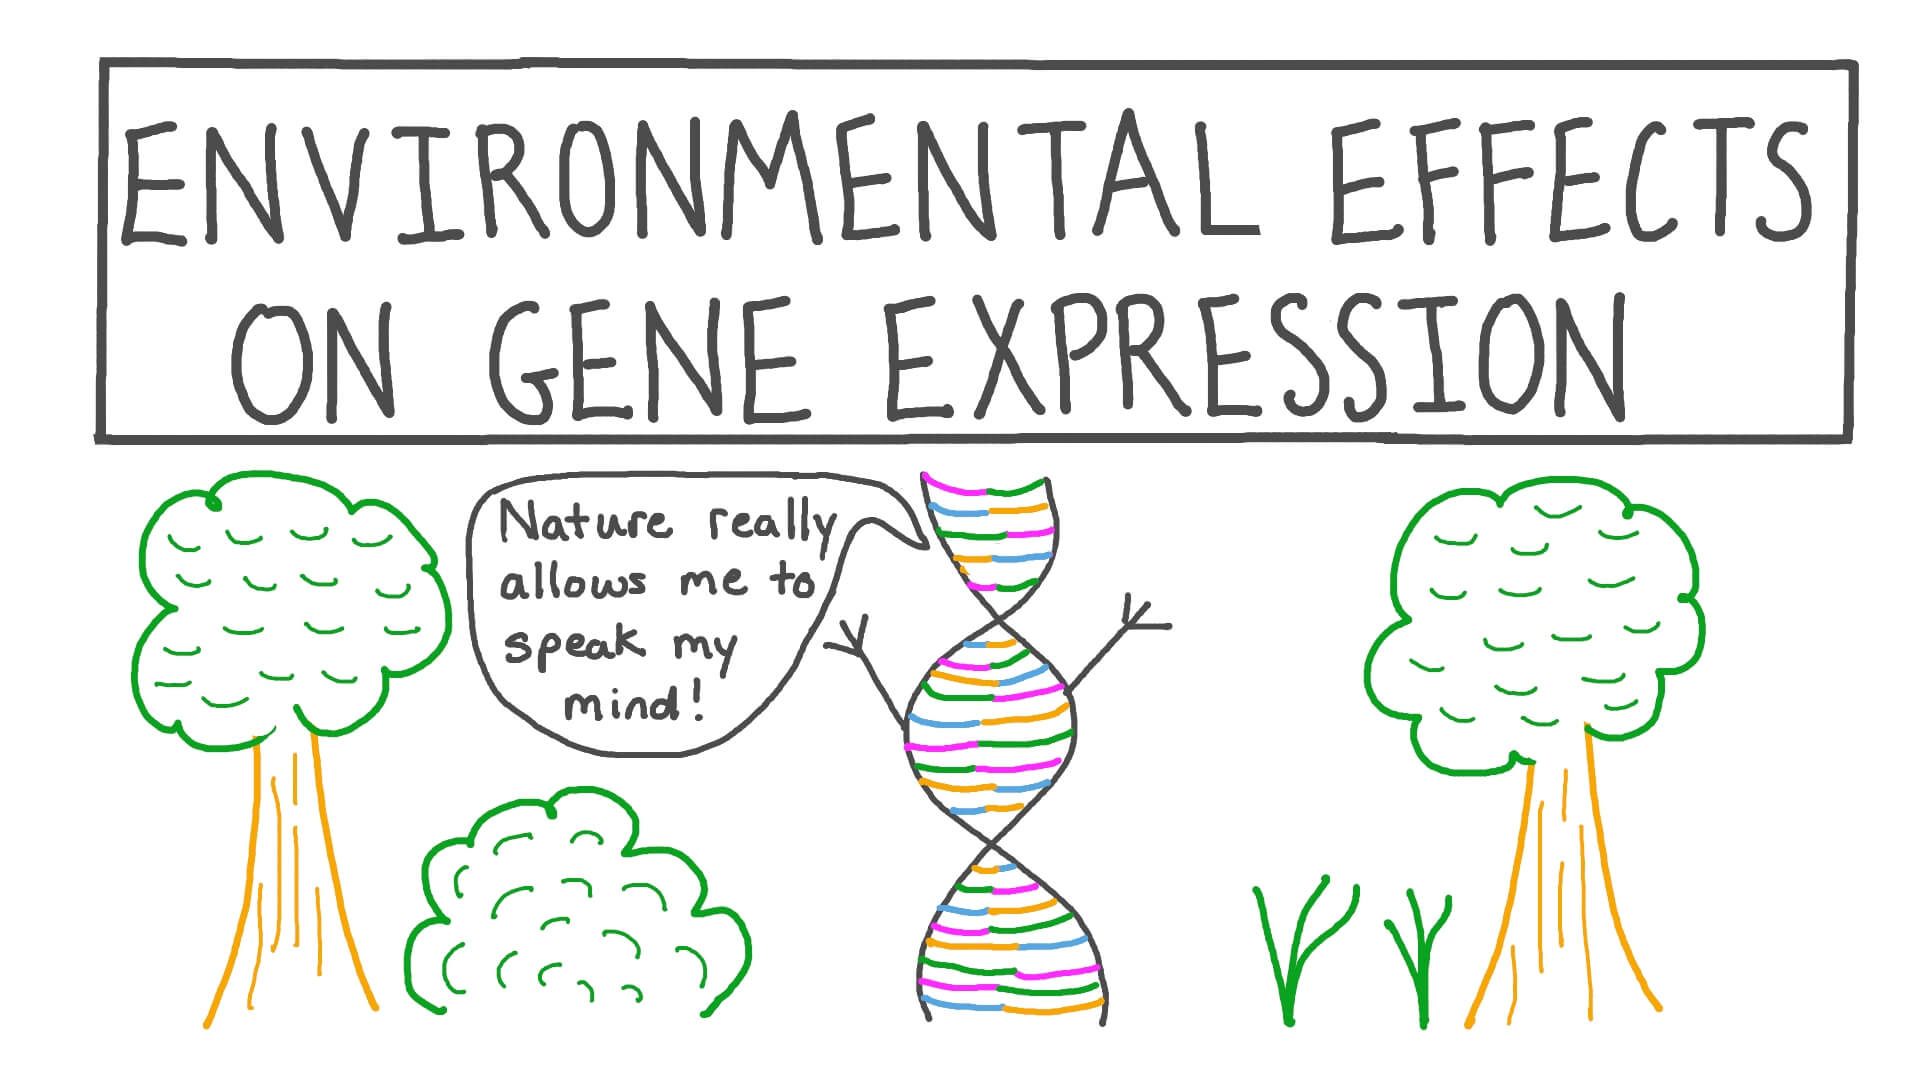 How Does the Environment Affect Gene Expression?